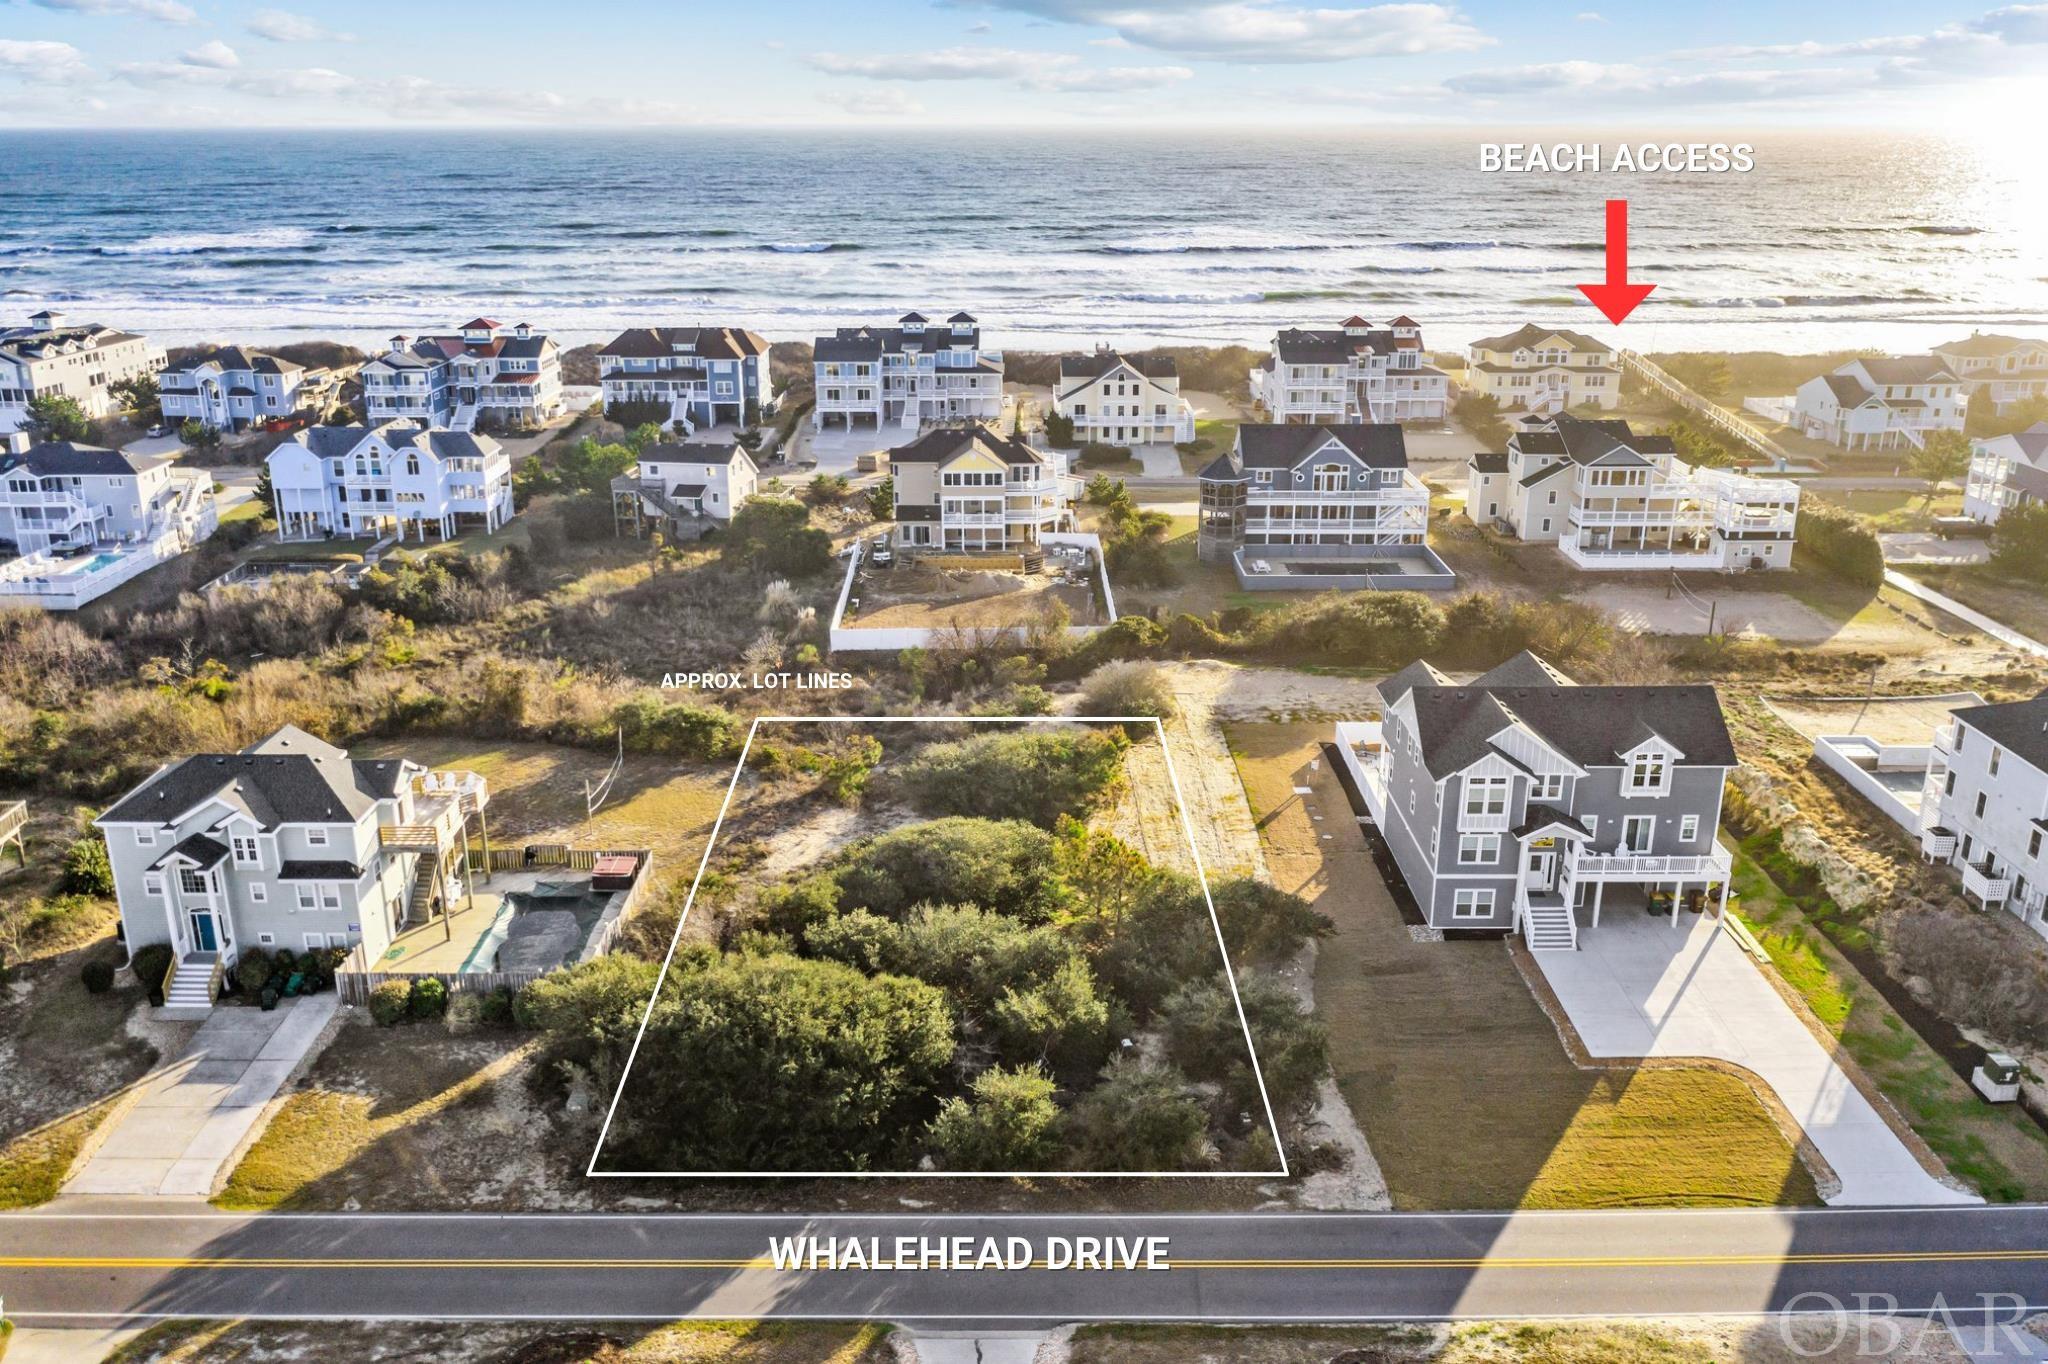 One of the last remaining 3rd row homesites in the highly desirable Whalehead Club, this gorgeous property is now available for your dream Corolla beach home. Whether you are looking to build your primary residence, a second home, or an investment property, this large 20,000 square foot lot will easily accommodate the home of your dreams! Nicely elevated and a designated X flood zone just 3rd from the corner, the beautiful wide beaches of the Whalehead Club are an easy, short walk. This 3rd row location allows one to situate a future home to capture ocean breezes and a possibility of ocean views! Solid investment value and close proximity to Corolla's restaurants, Shopping, Grocery Stores, and Activities, including Currituck Club Golf Course, Historic Whalehead Club, Wildlife Center, Currituck Beach Lighthouse, and the Wild Horses. Don't wait, take a look today!